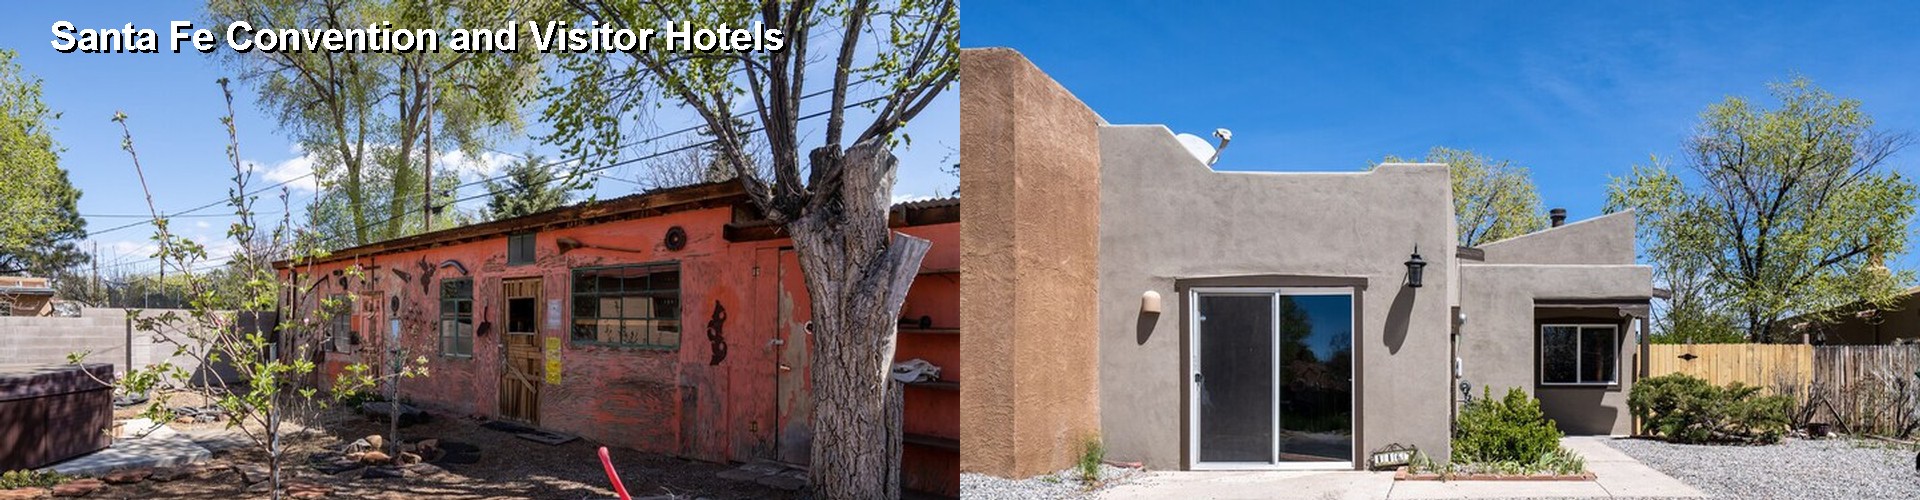 5 Best Hotels near Santa Fe Convention and Visitor